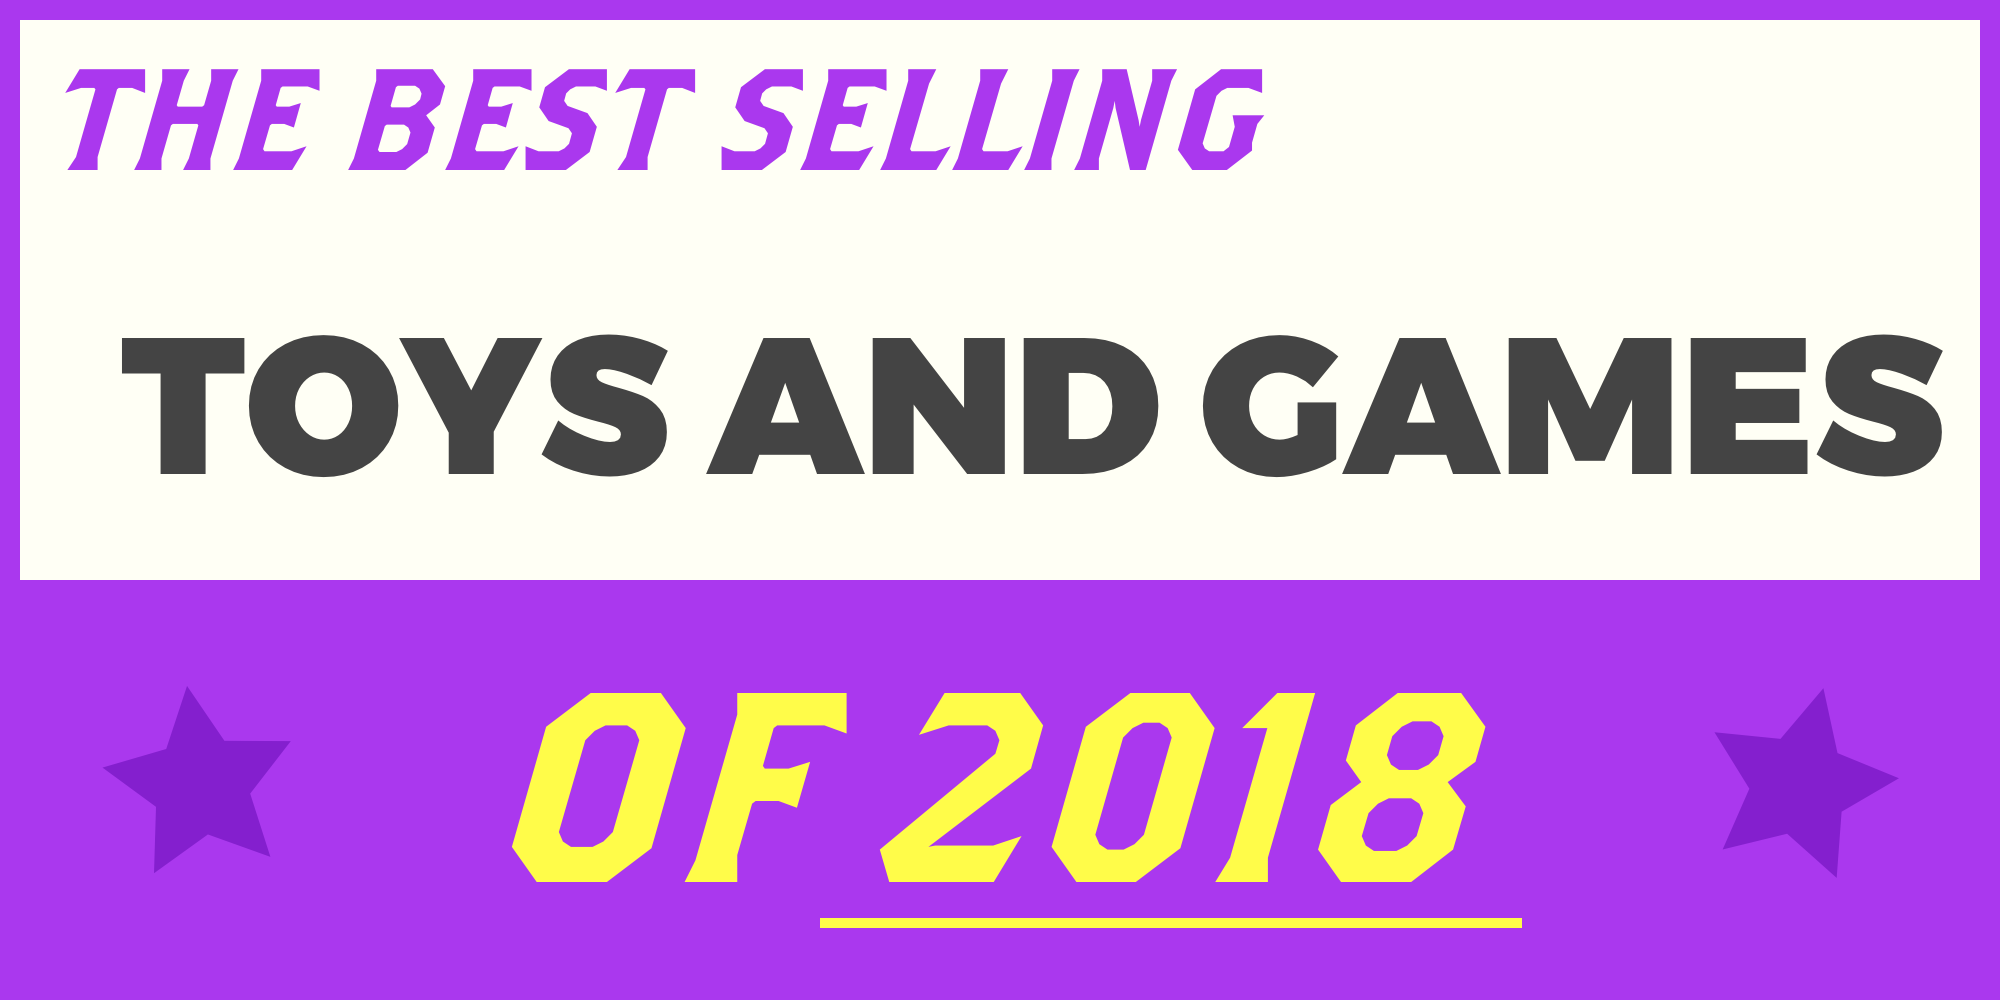 number one selling toy 2018